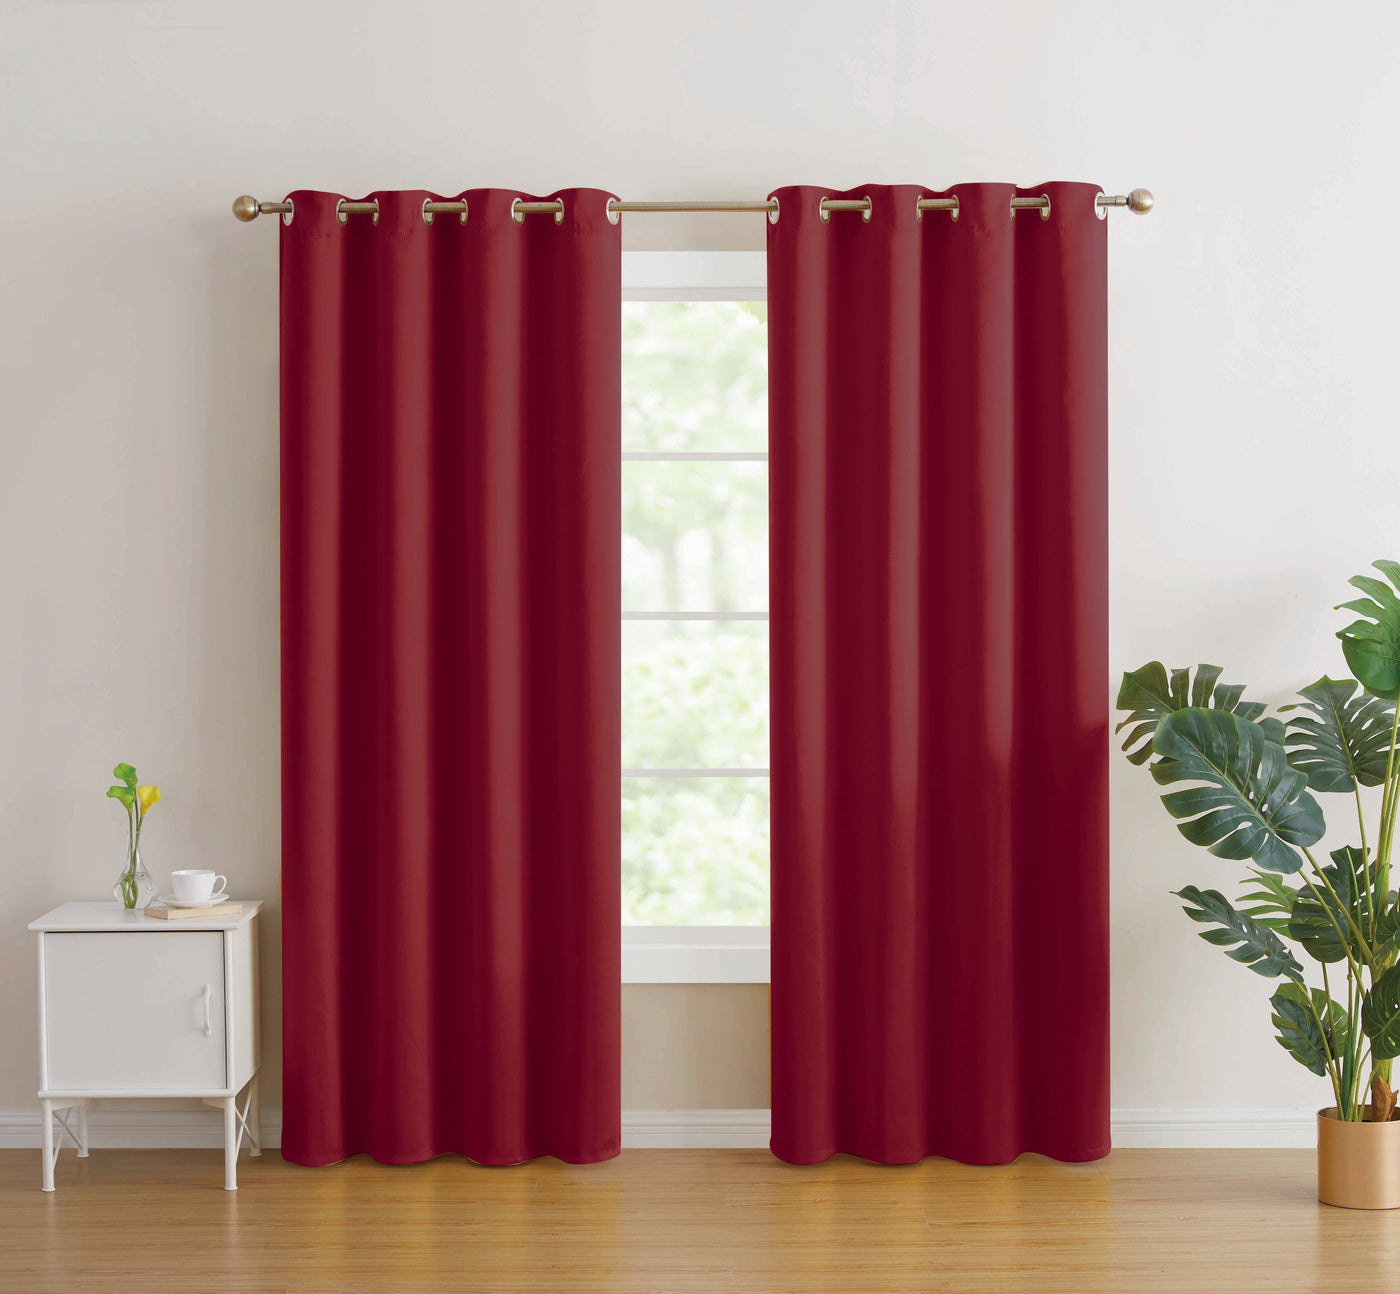 2pc Solid Grommet Thermal Insulated Window Curtain Panels Room Darkening Blackout 95" - Jenin-Home-Furnishing.CURTAINS